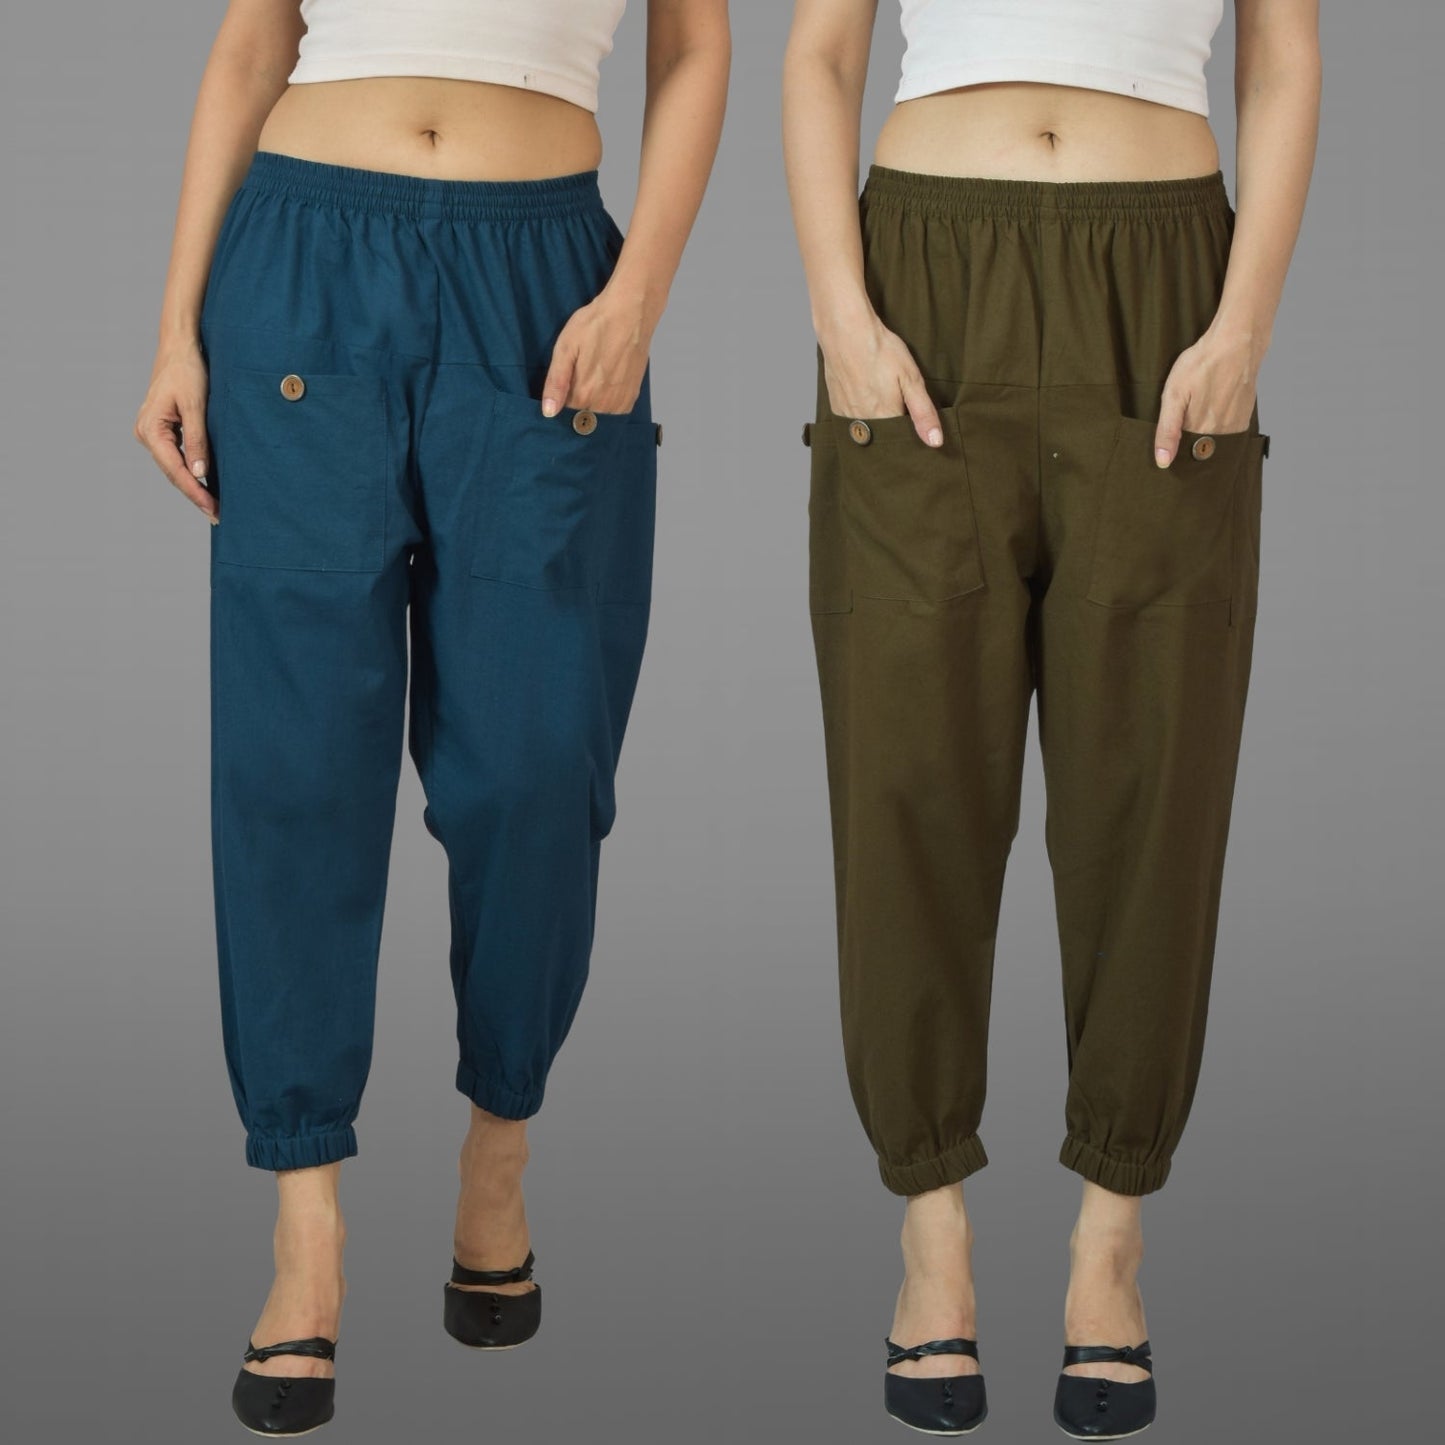 Combo Pack Of Womens Teal Blue And Dark Green Four Pocket Cotton Cargo Pants